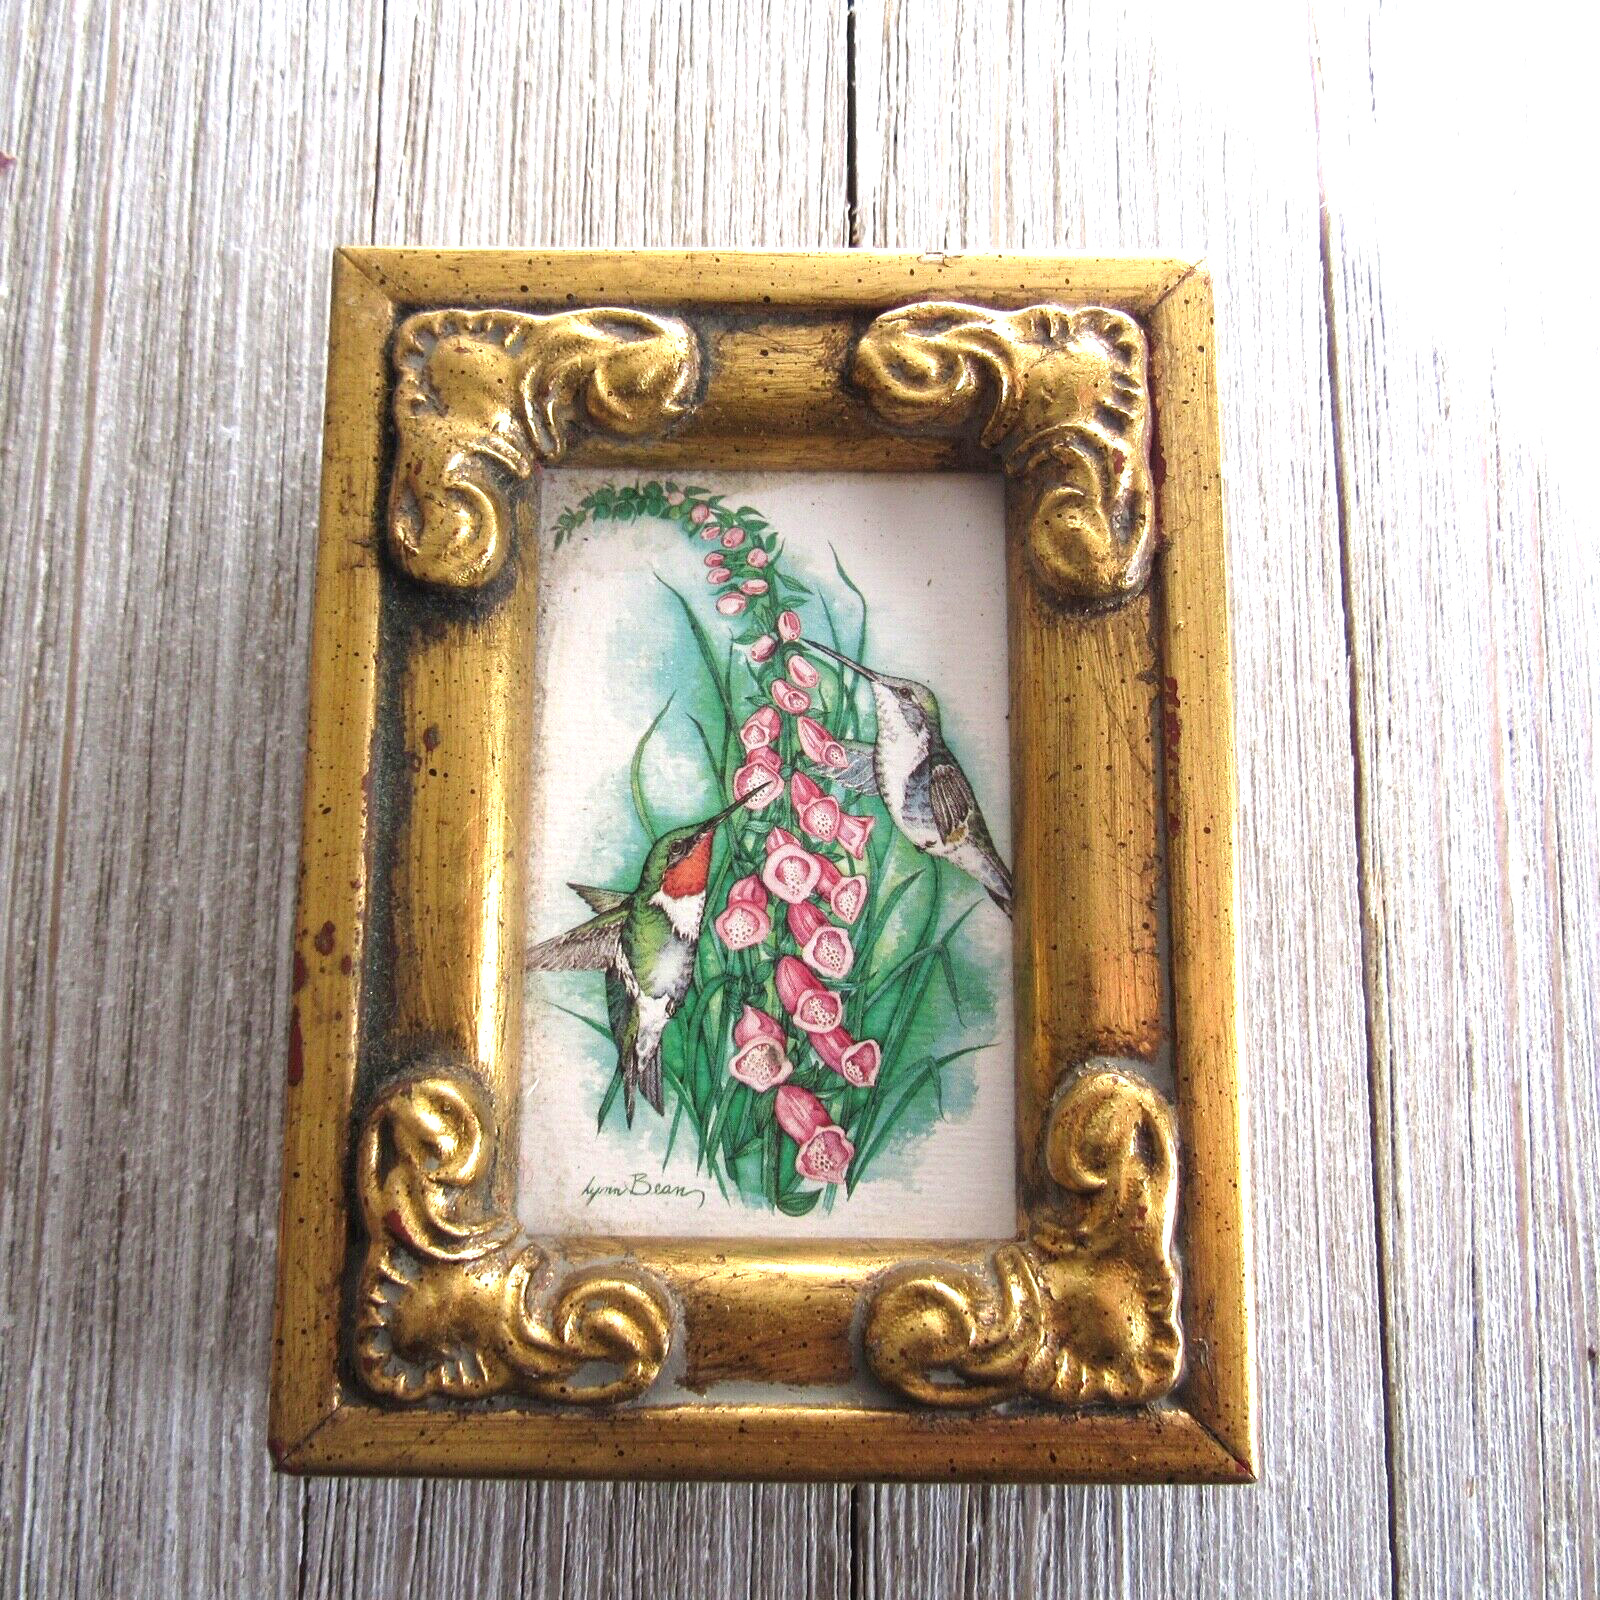 Vintage Gold Florentine Style Frame and Hummingbird Picture ORNATE